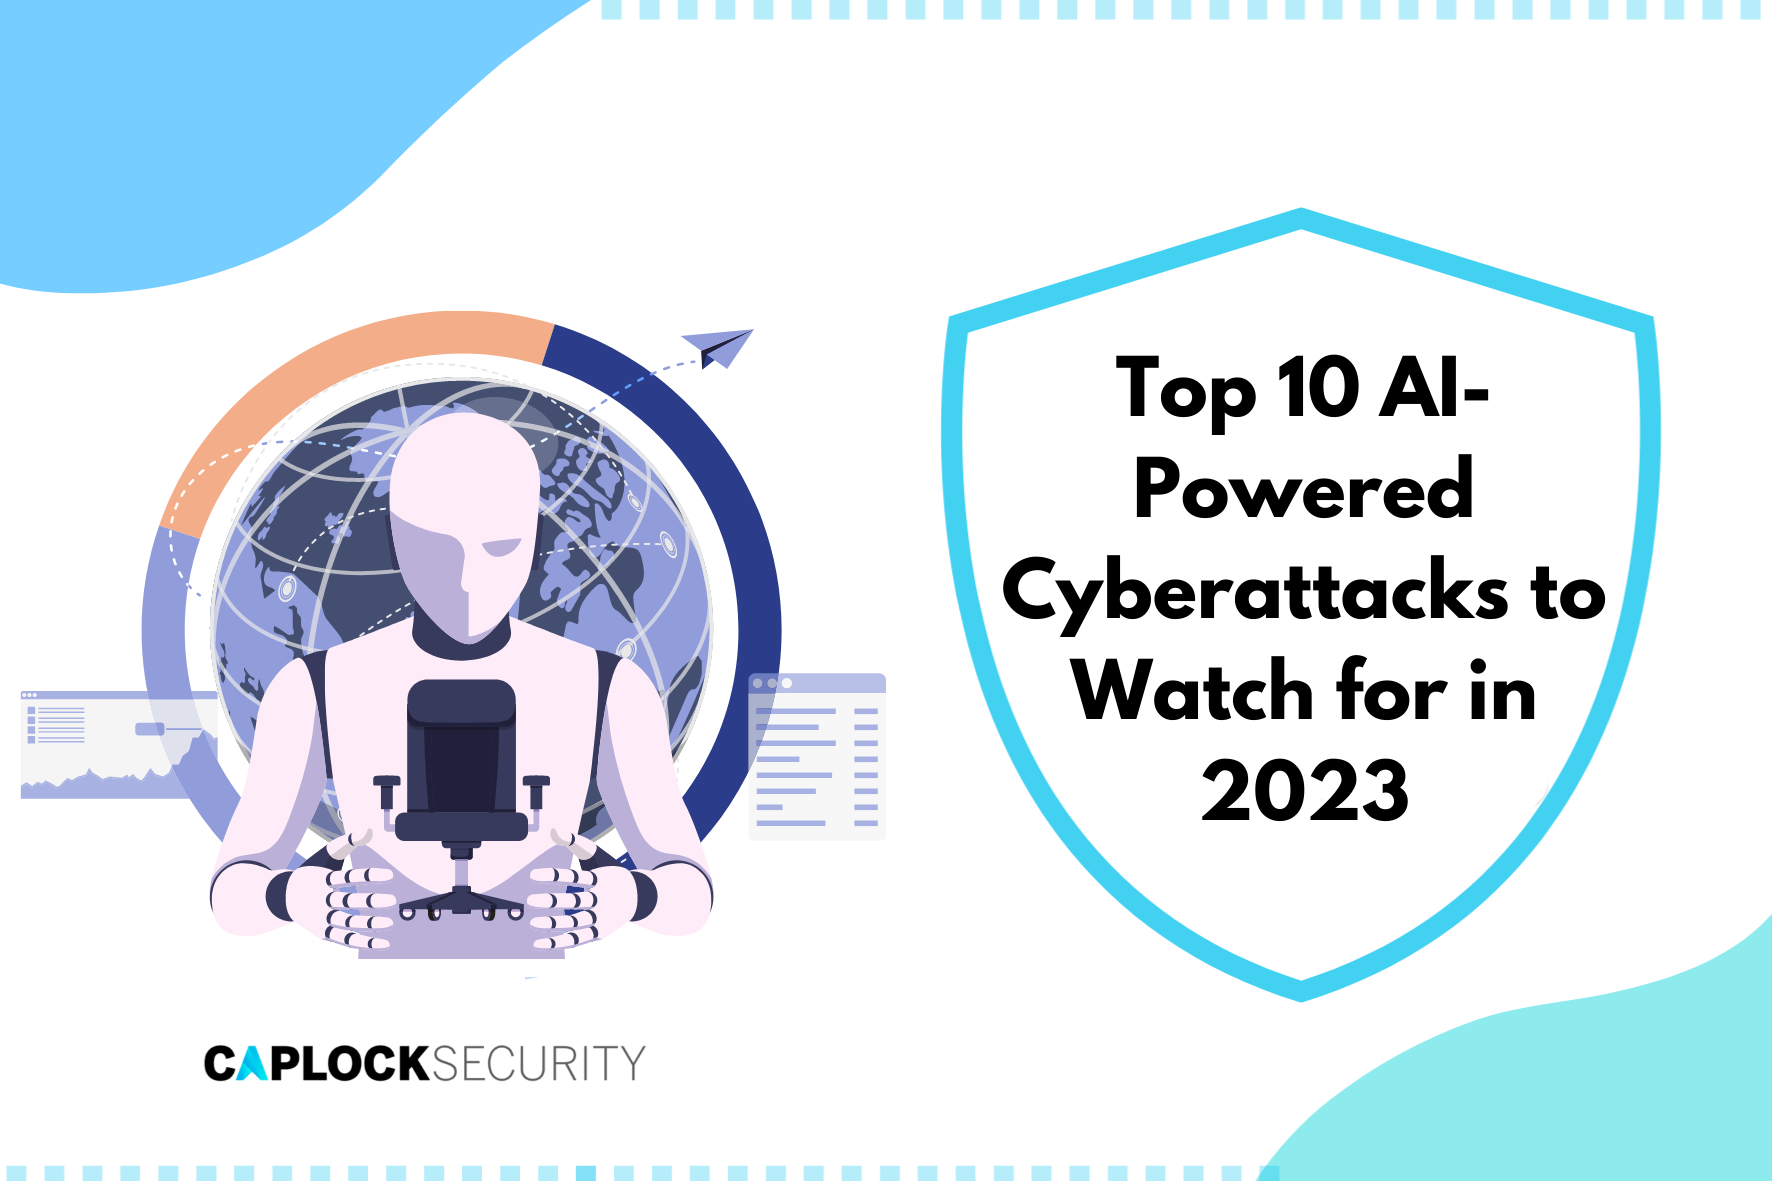 AI, Attacks, Cyberattacks, AI Misuse, Deepfakes, Vulnerability Hacking, AI powered Malware, Phishing, Advanced Persistent Threats, APTs, DDos Attack, Machine Learning Poisoning, Password Guessing, Human Impersonation